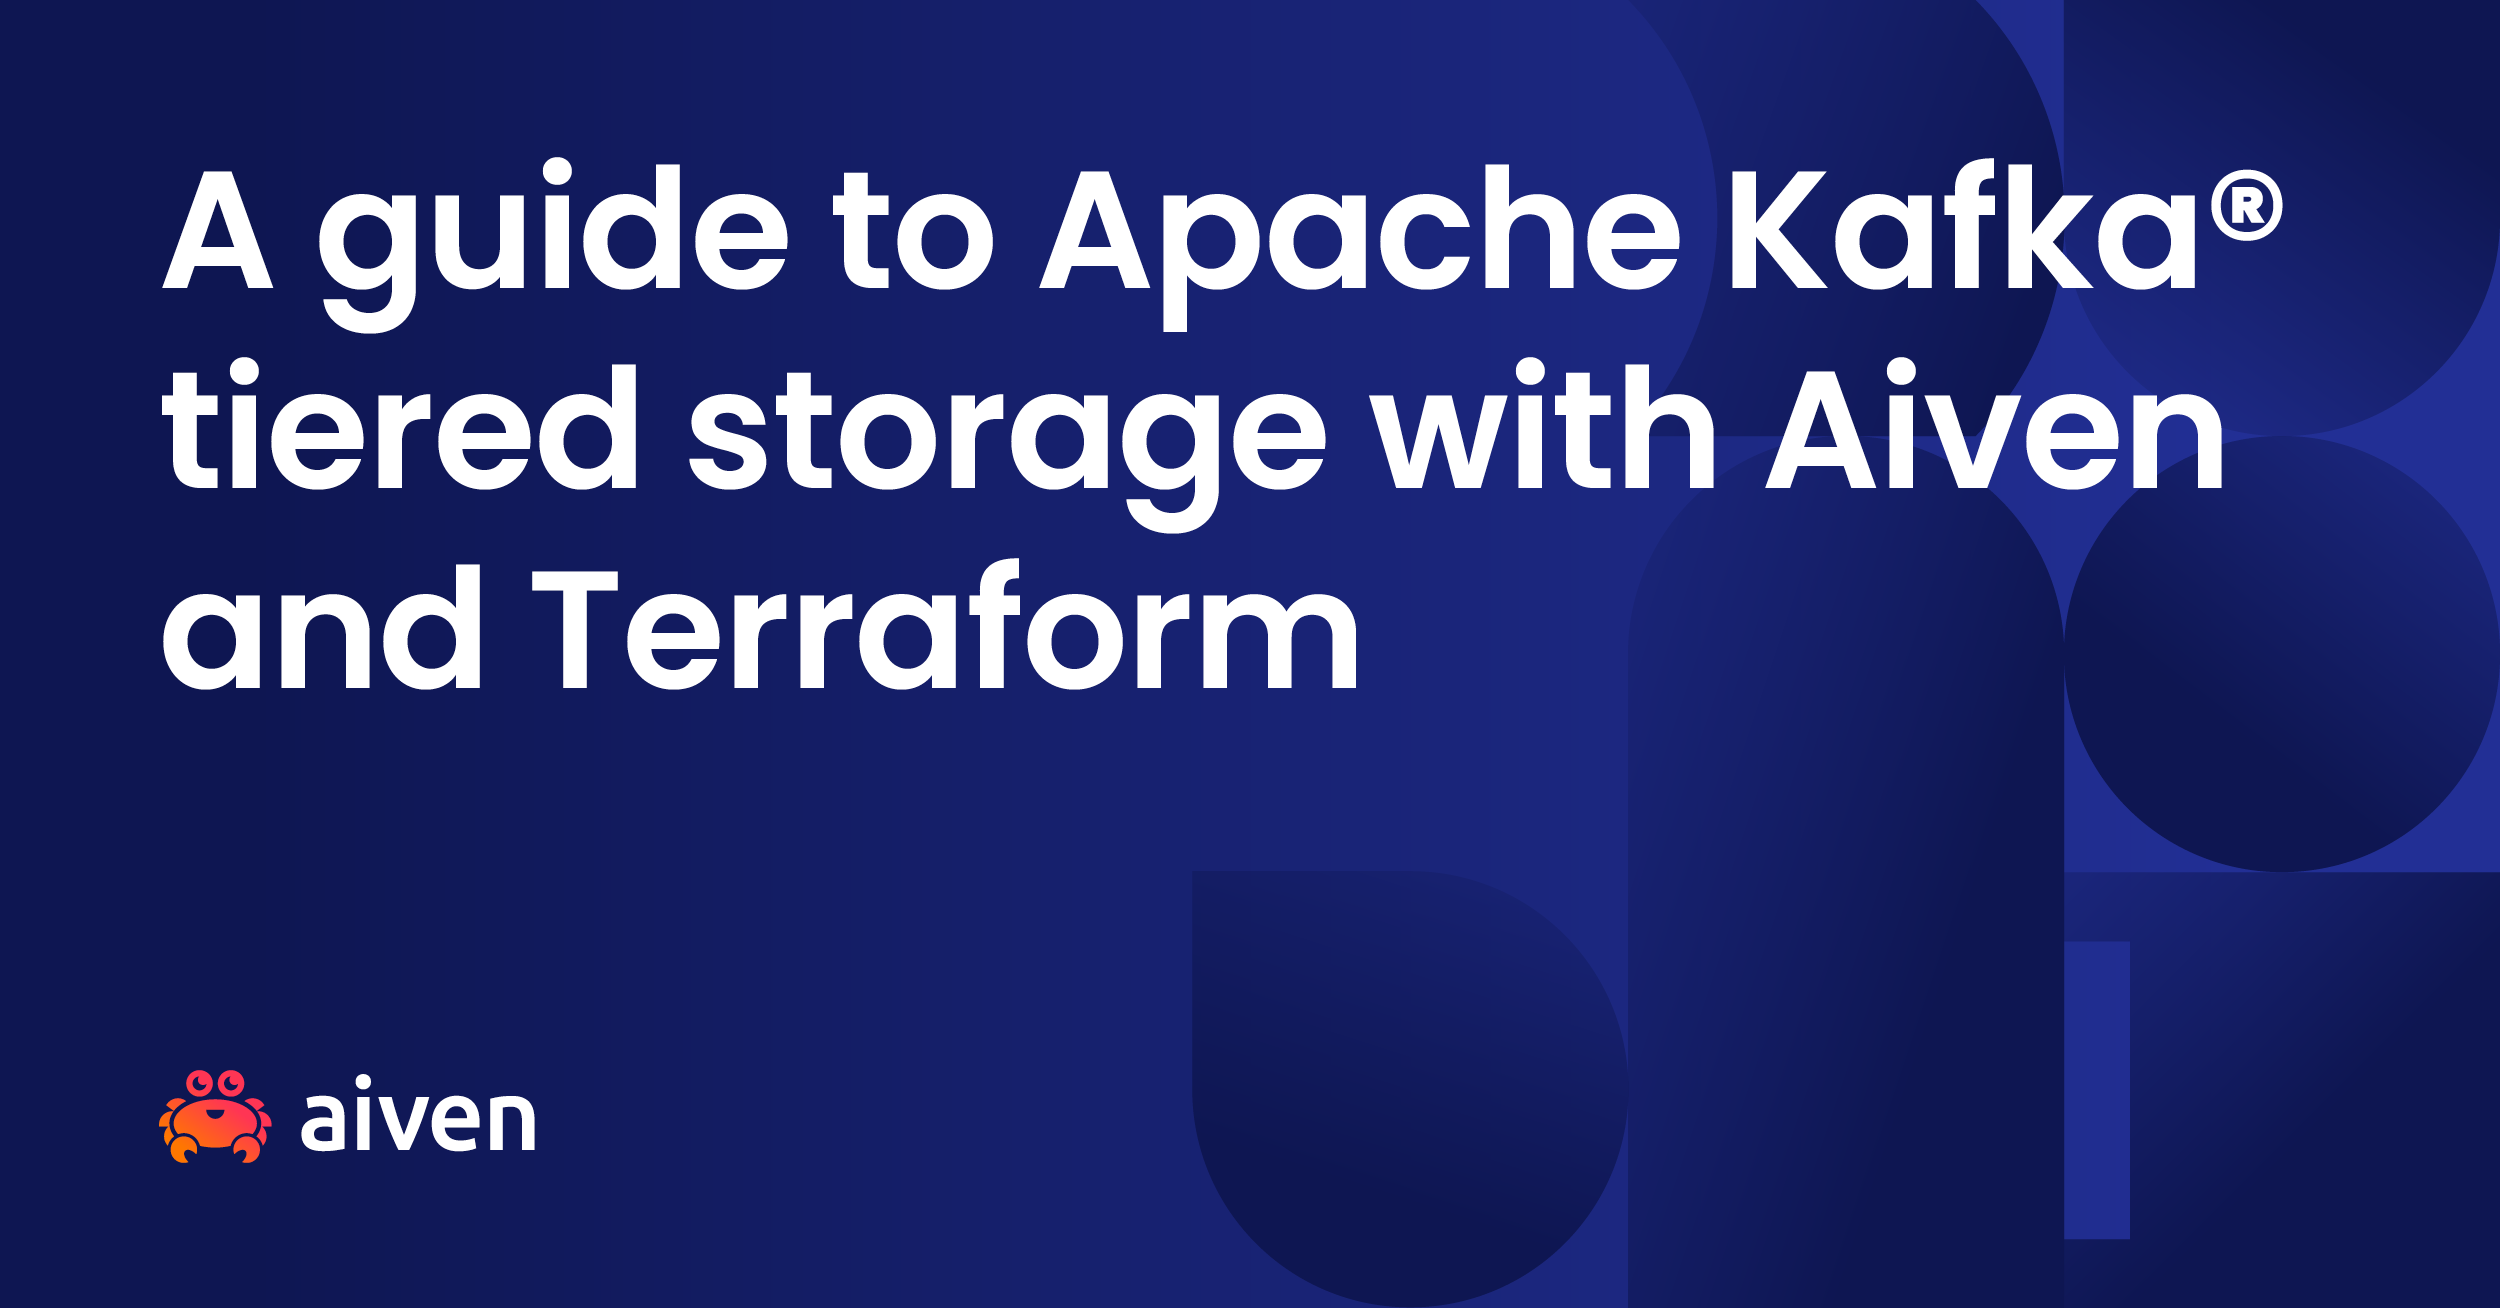 Text saying "A guide to Apache Kafka® tiered storage with Aiven and Terraform" and the Aiven logo